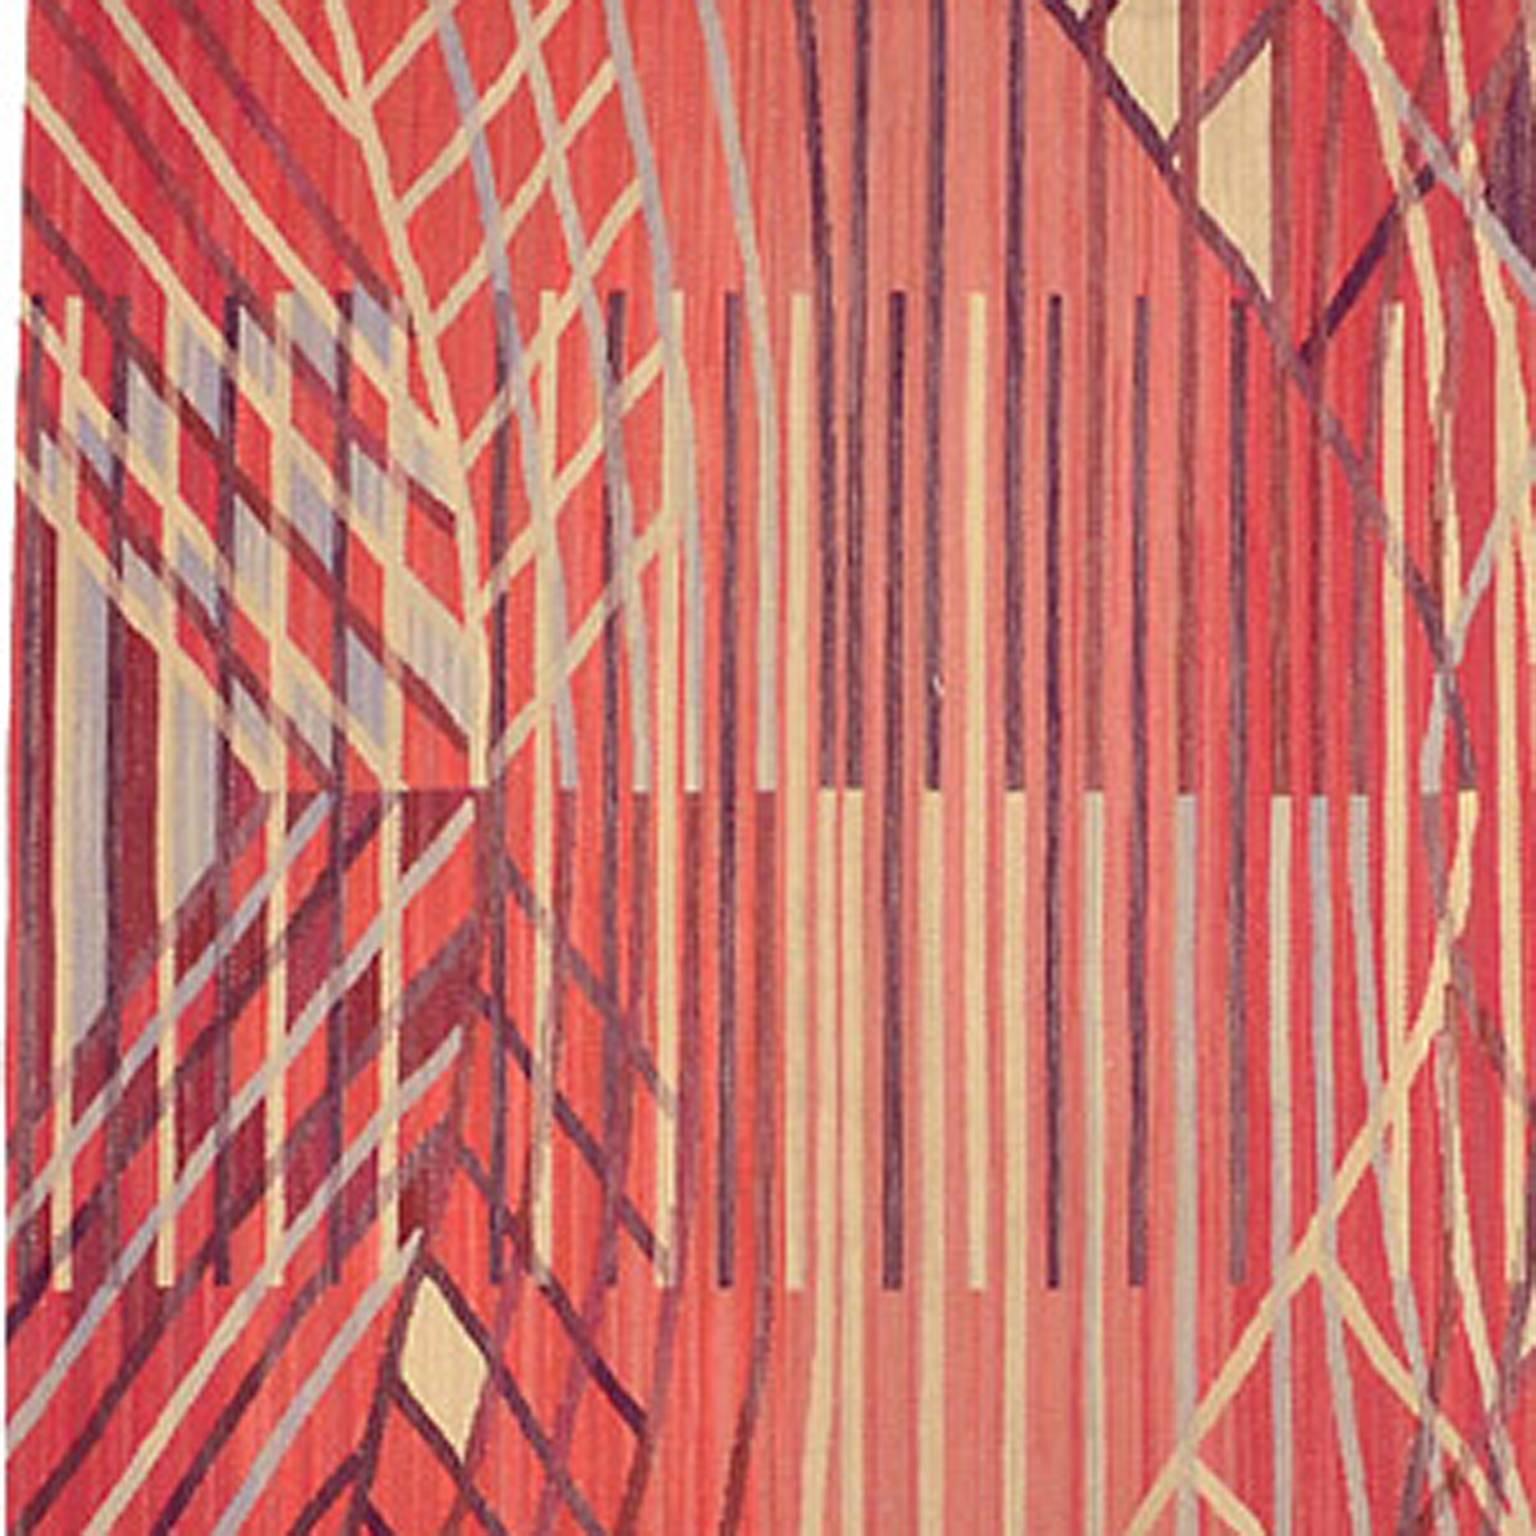 Swedish Flat-Weave Wall Hanging by Barbro Nilsson, AB Märta Måås-fjetterström In Good Condition For Sale In New York, NY